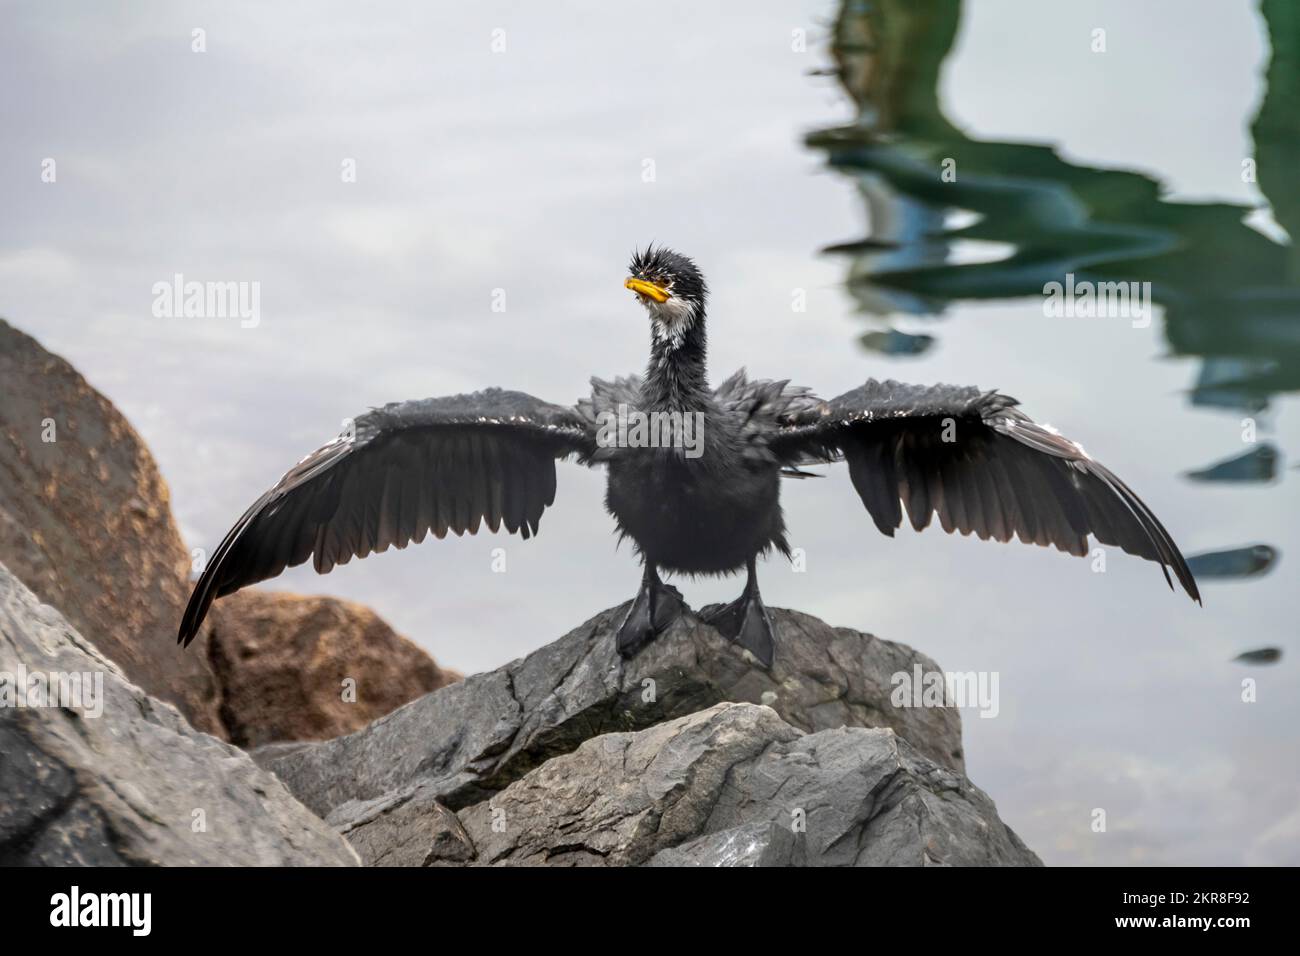 Young black cormorant, or black shag, drying its wings after swimming in harbour, Wellington, North island, New Zealand Stock Photo